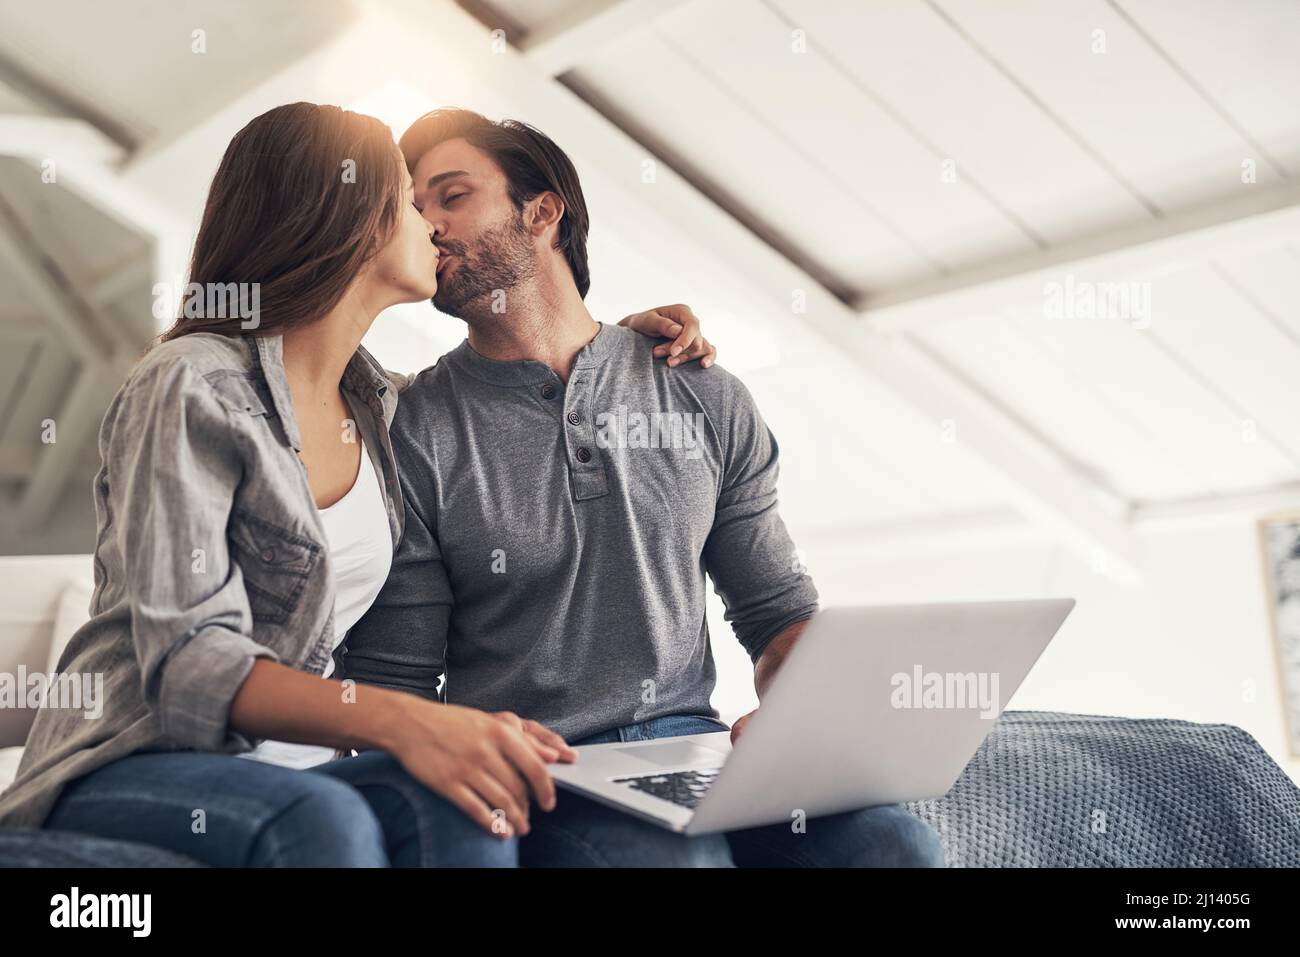 Snogging before we start blogging. Shot of an attractive young couple spending quality time at home. Stock Photo